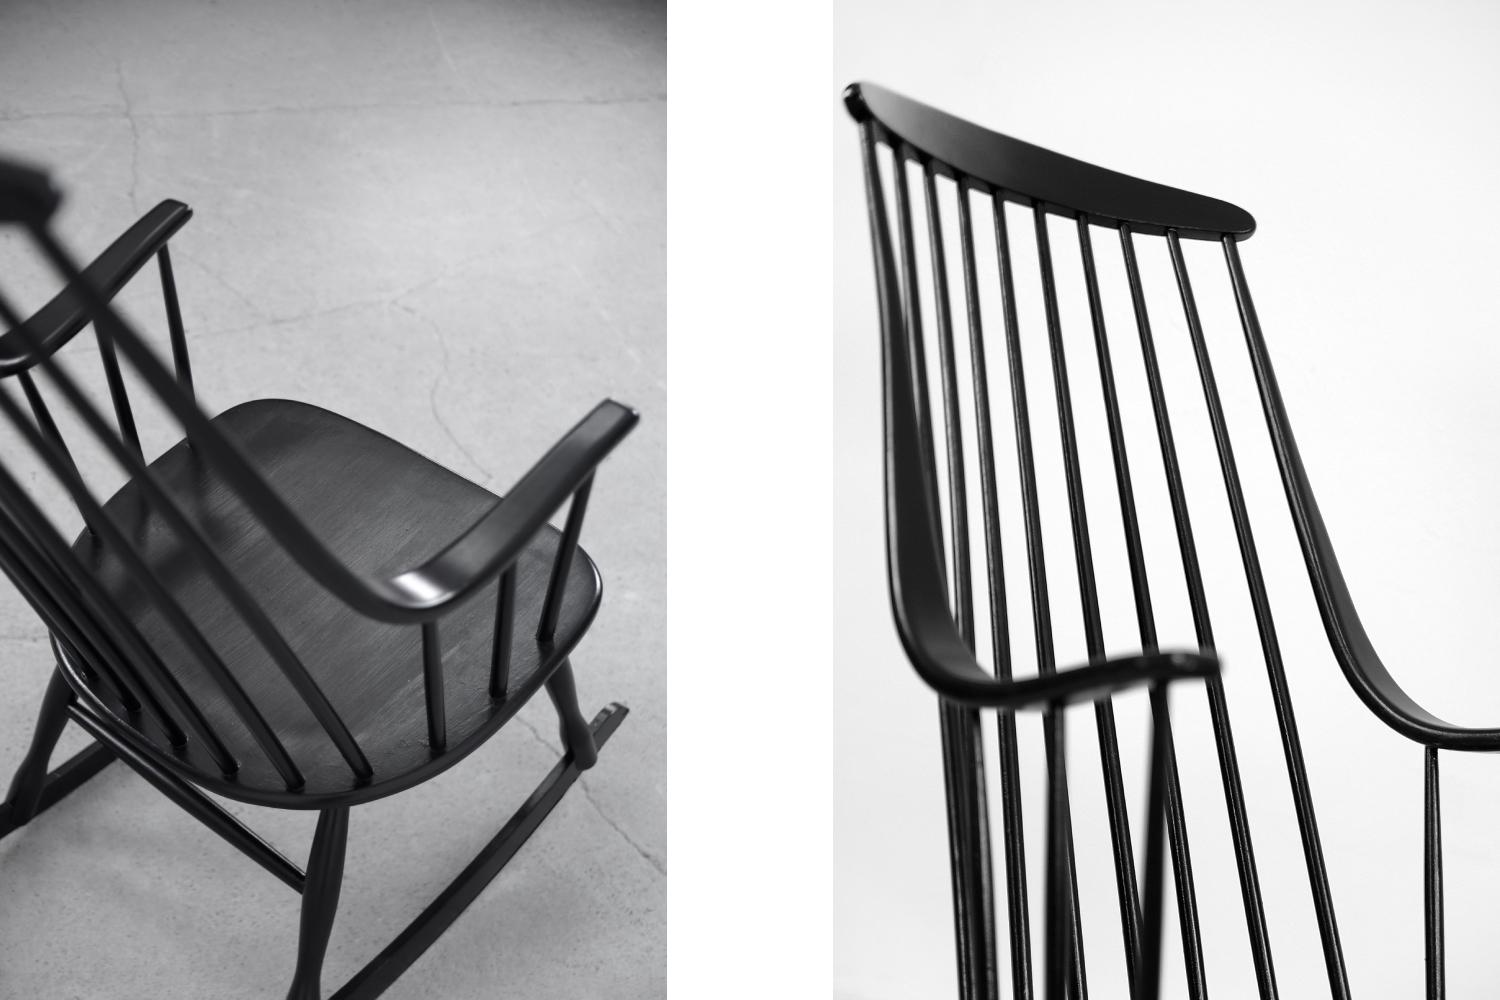 Mid-20th Century Vintage Swedish Wooden Black Rocking Chair Grandessa by Lena Larsson for Nesto For Sale